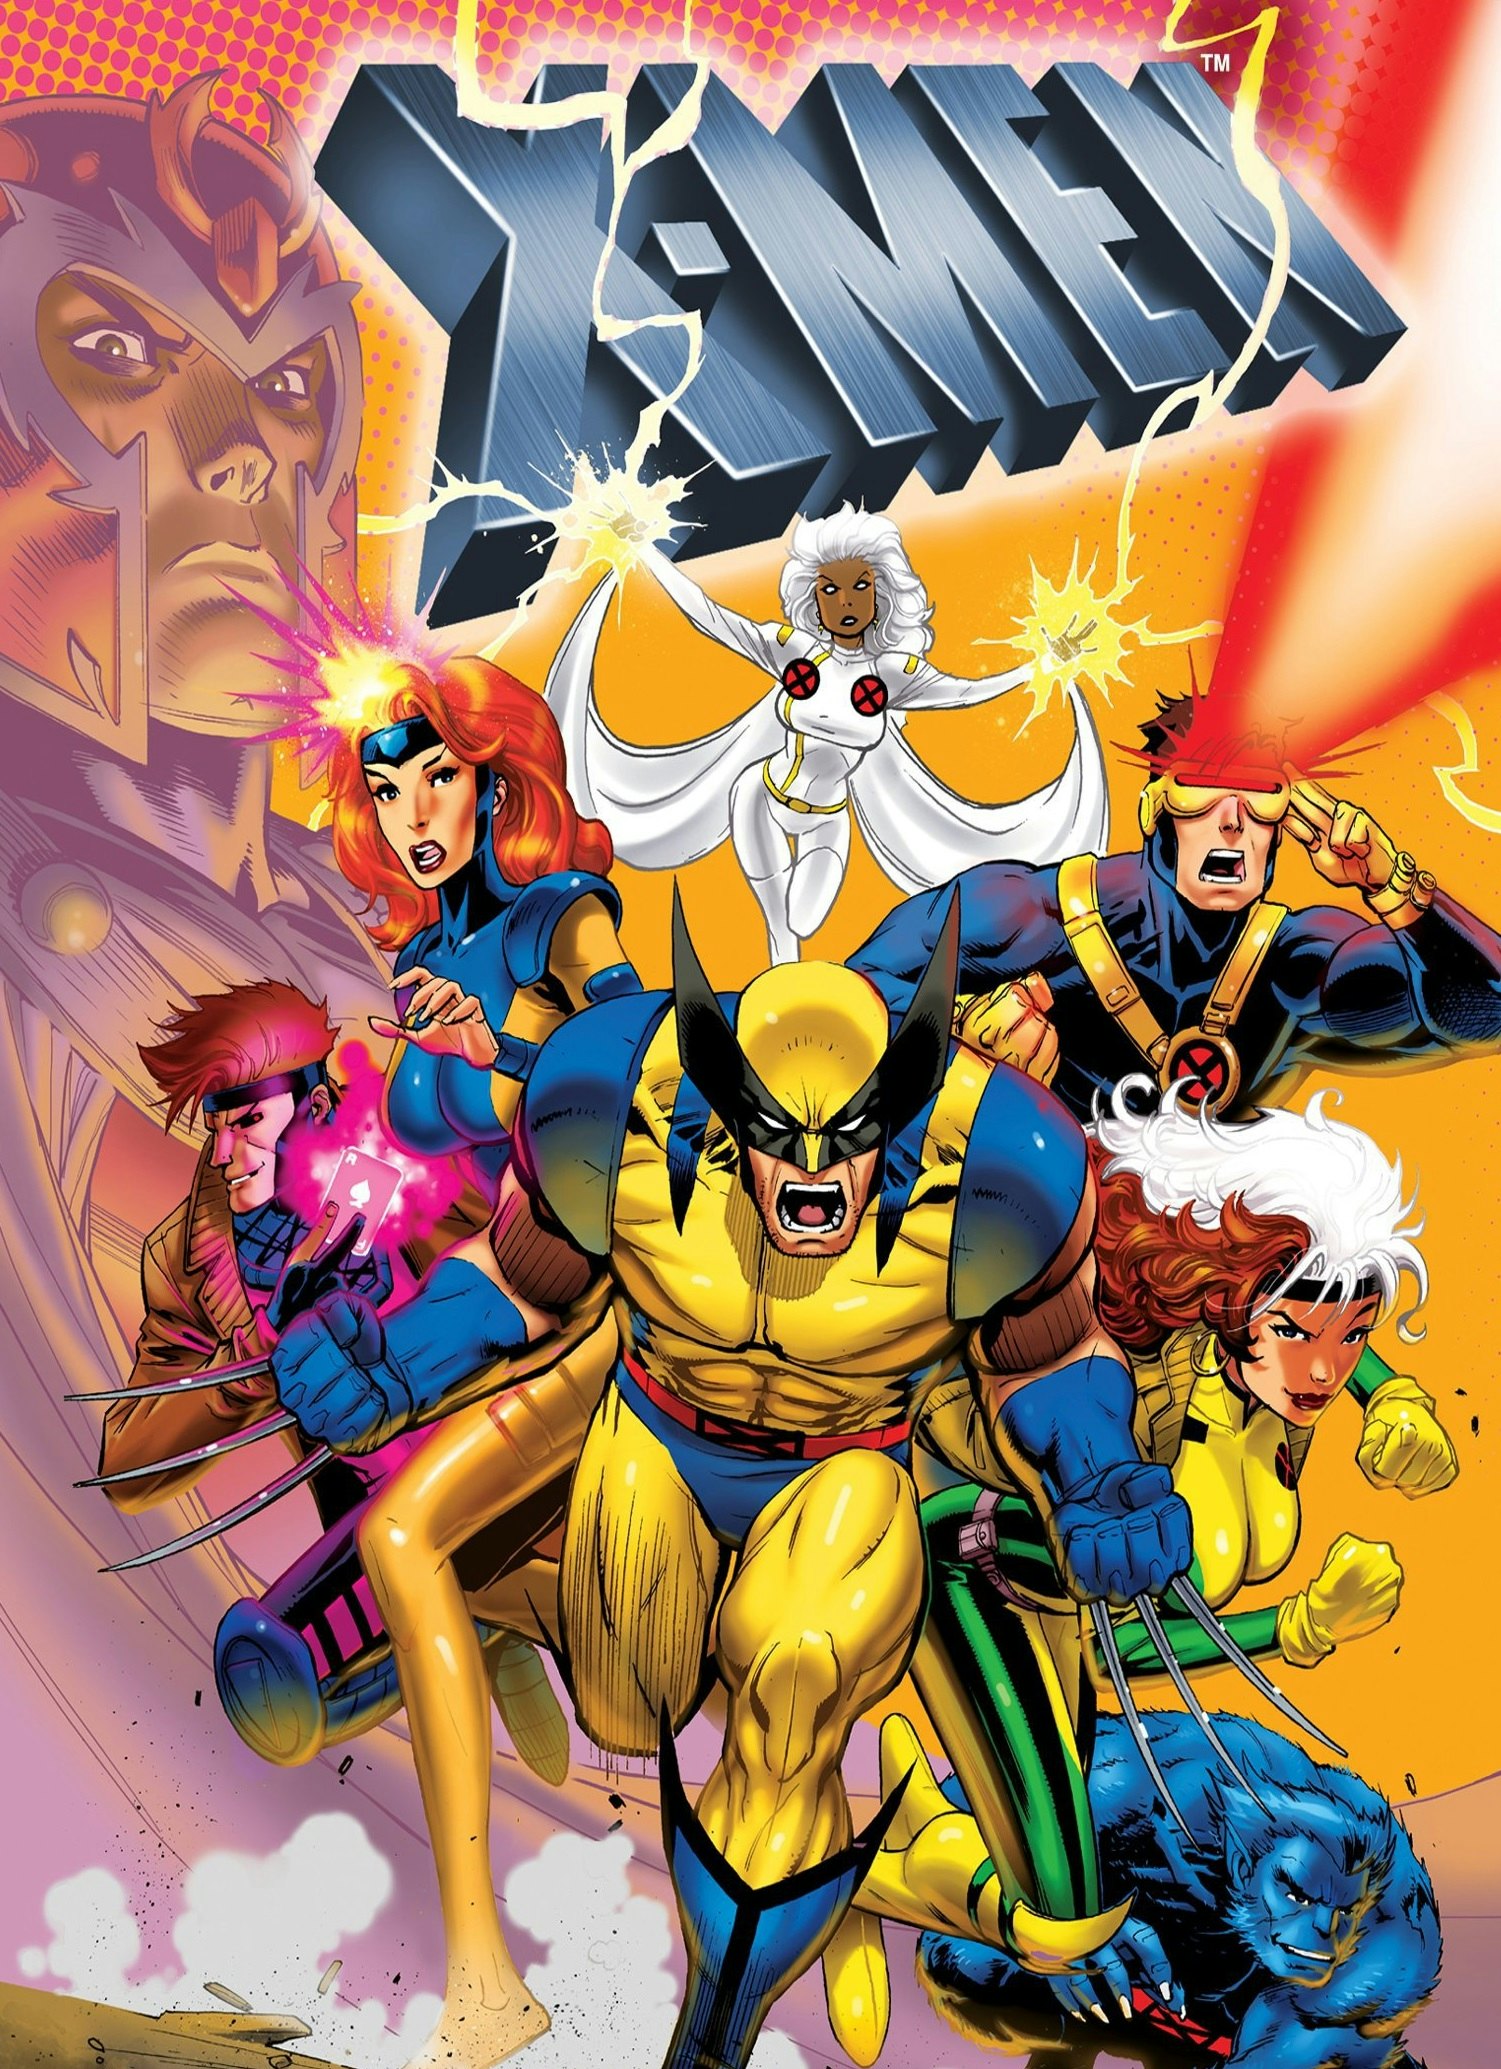 Mcu X Men News New Characters Allegedly Leak Will This Be The Cast